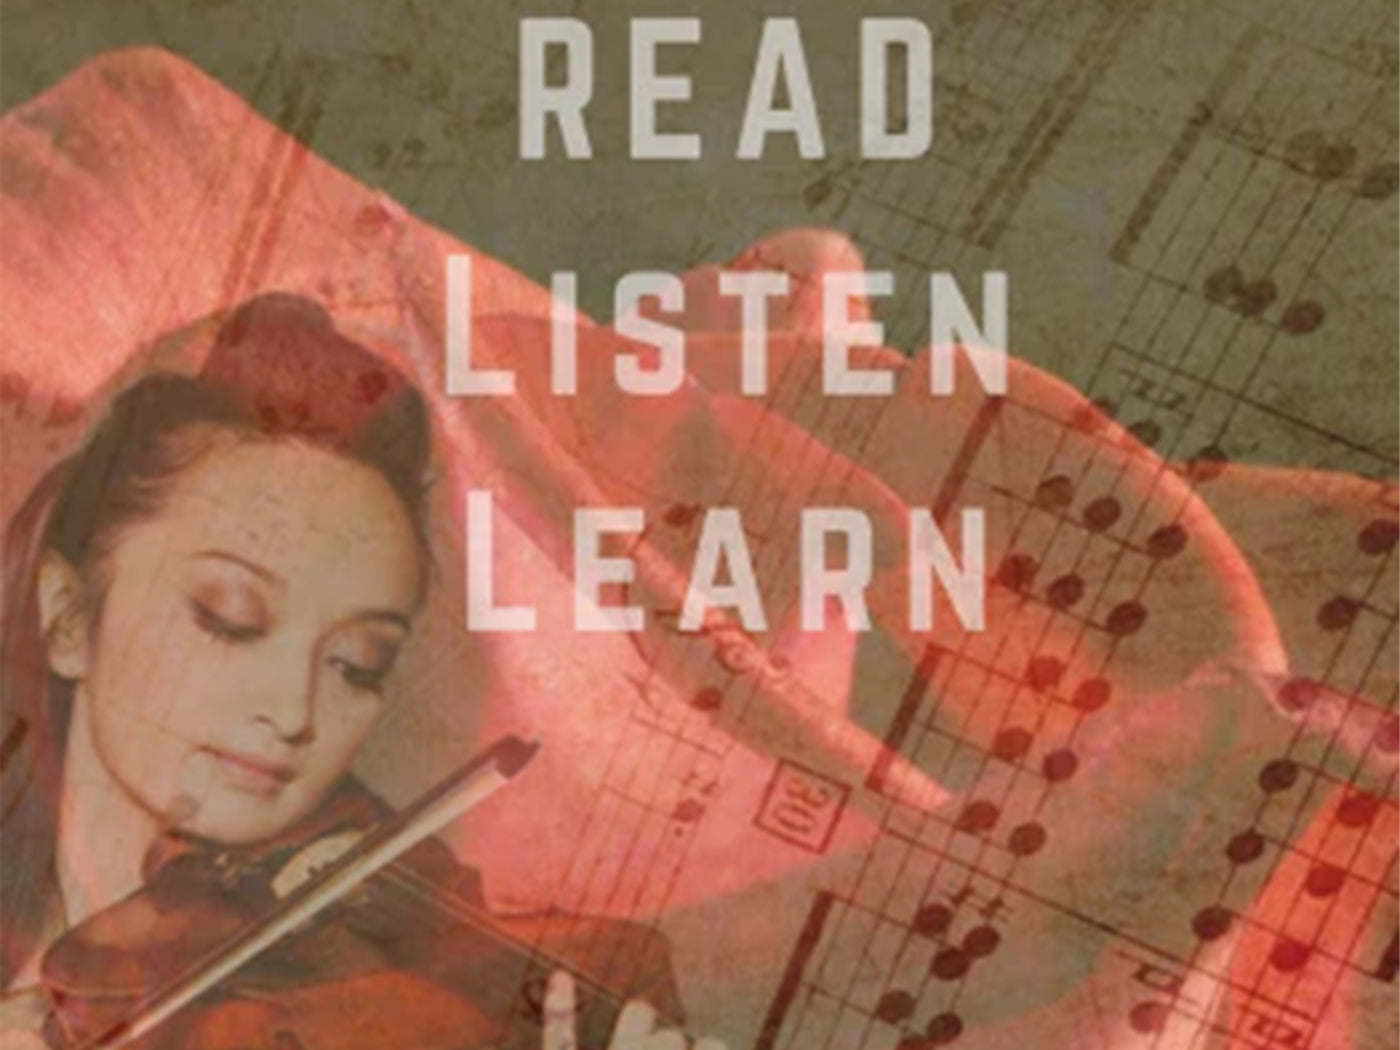 What's More Beneficial? Reading Music or Playing by Ear?